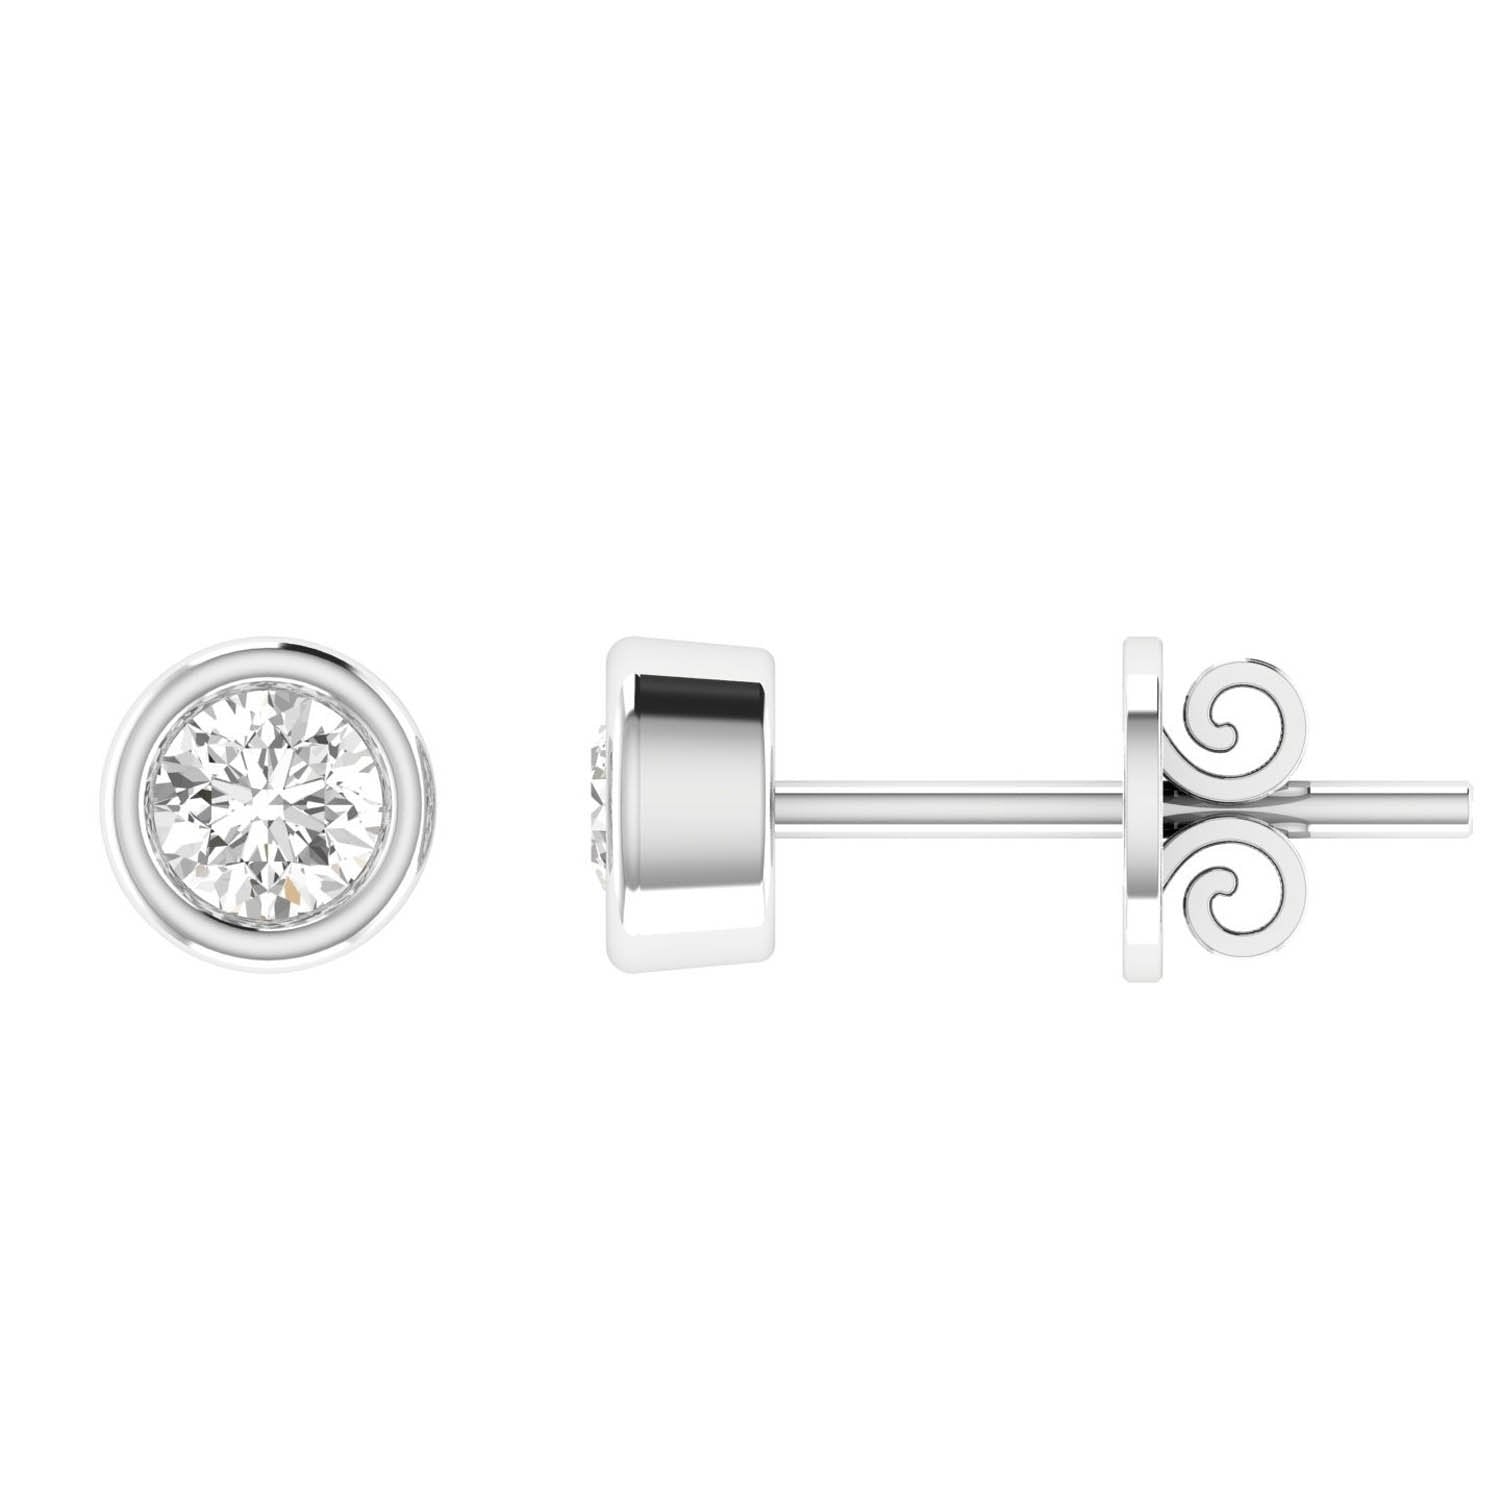 Diamond Stud Earrings with 0.70ct Diamonds in 18K White Gold - 18WBE70